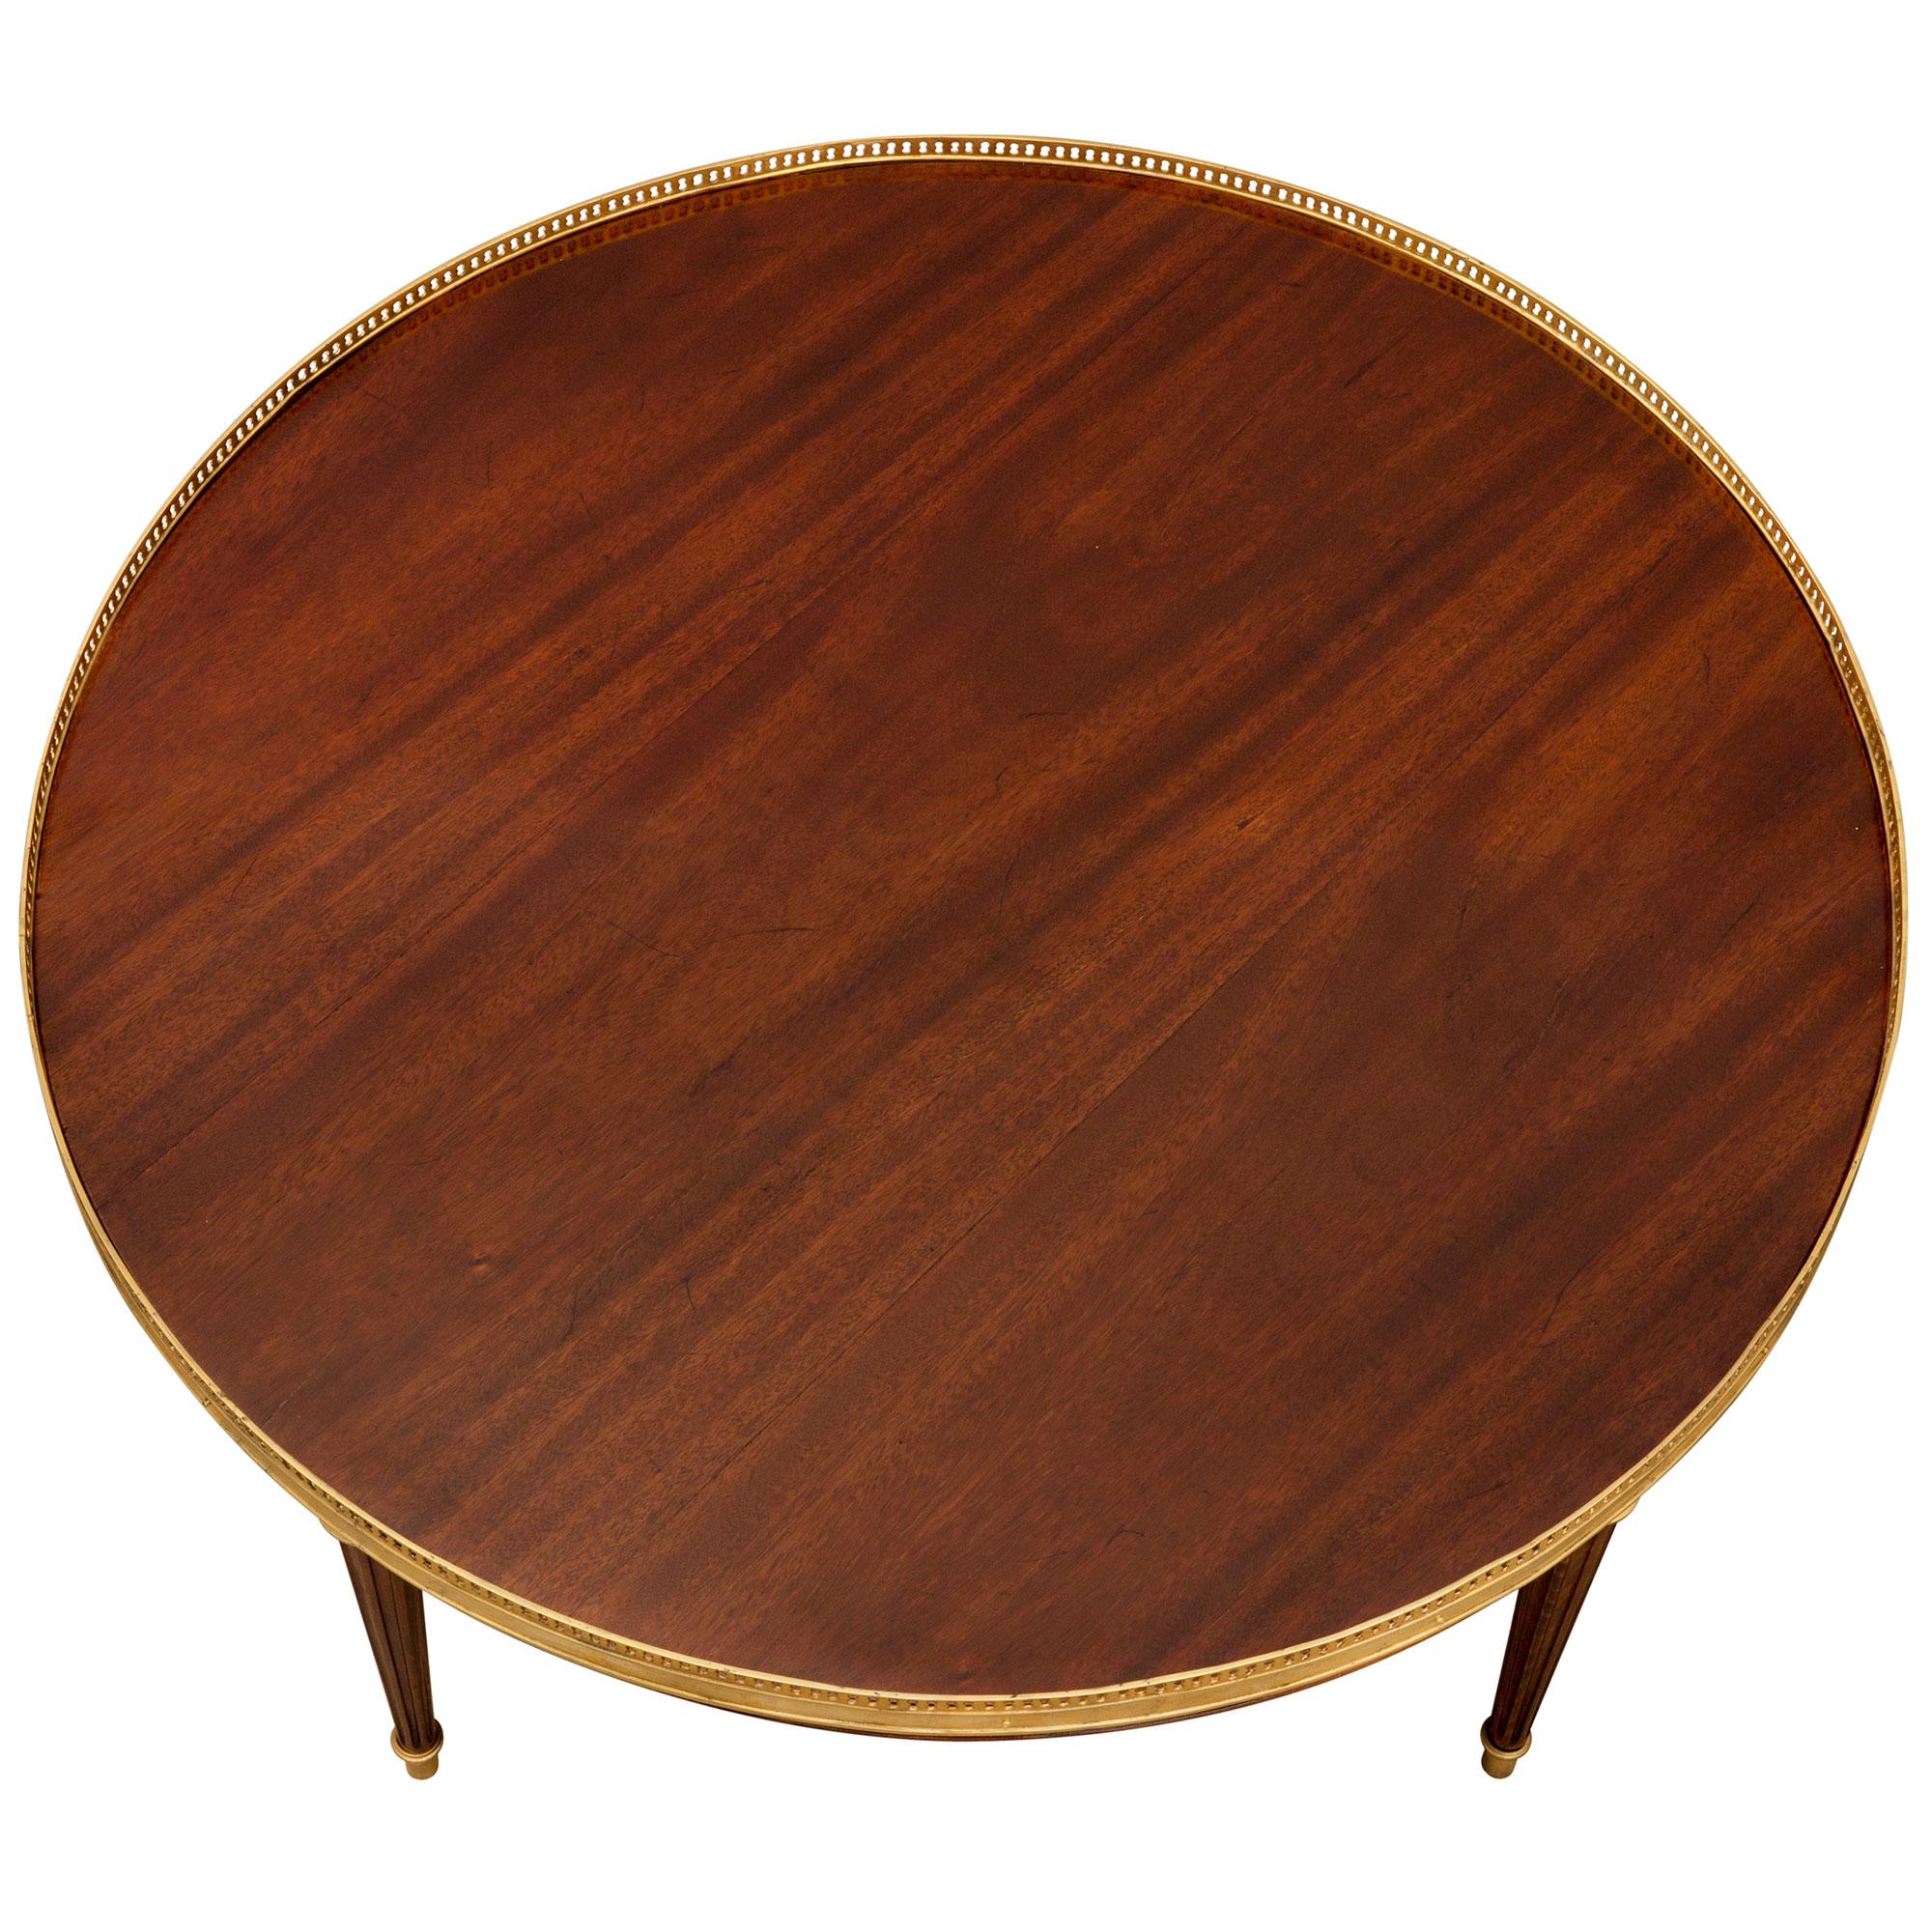 A most elegant French 19th century Louis XVI style mahogany and ormolu cocktail/coffee table. The table is raised by slender circular tapered fluted legs with fine ormolu sabots and mottled top caps. Above each leg are richly chased square ormolu